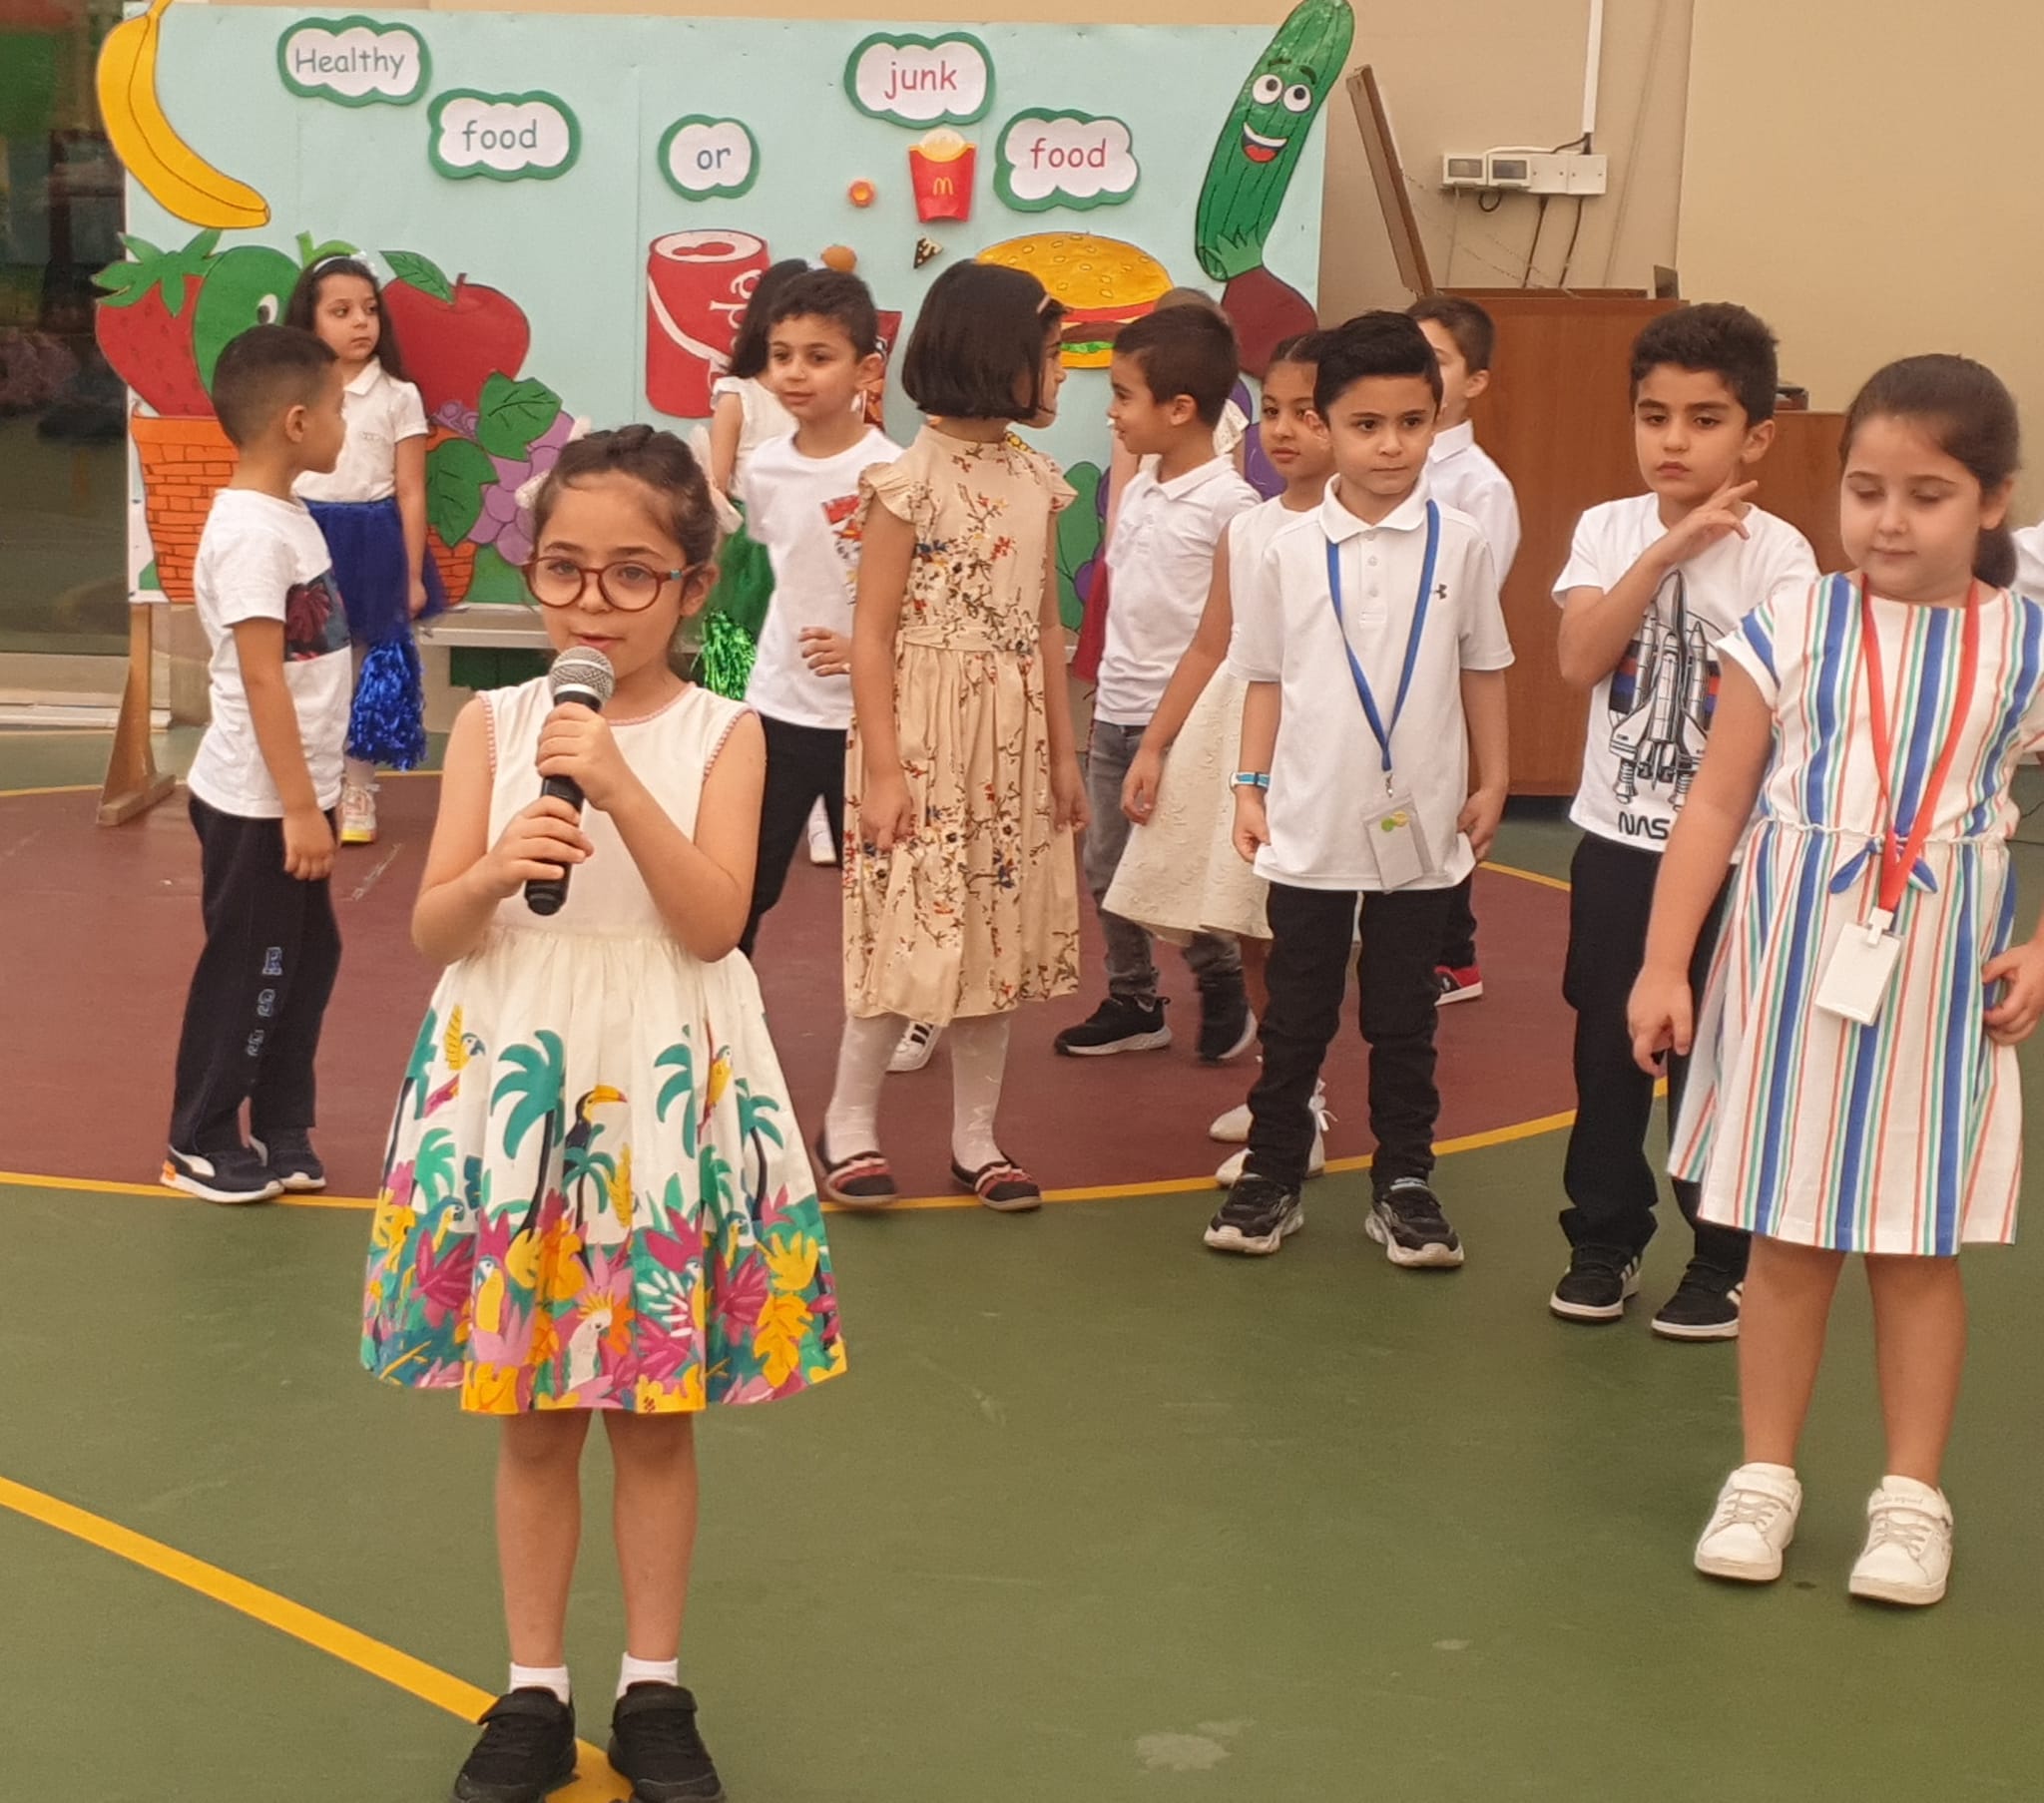  healthy and unhealthy  food  KG2 ( A ) students